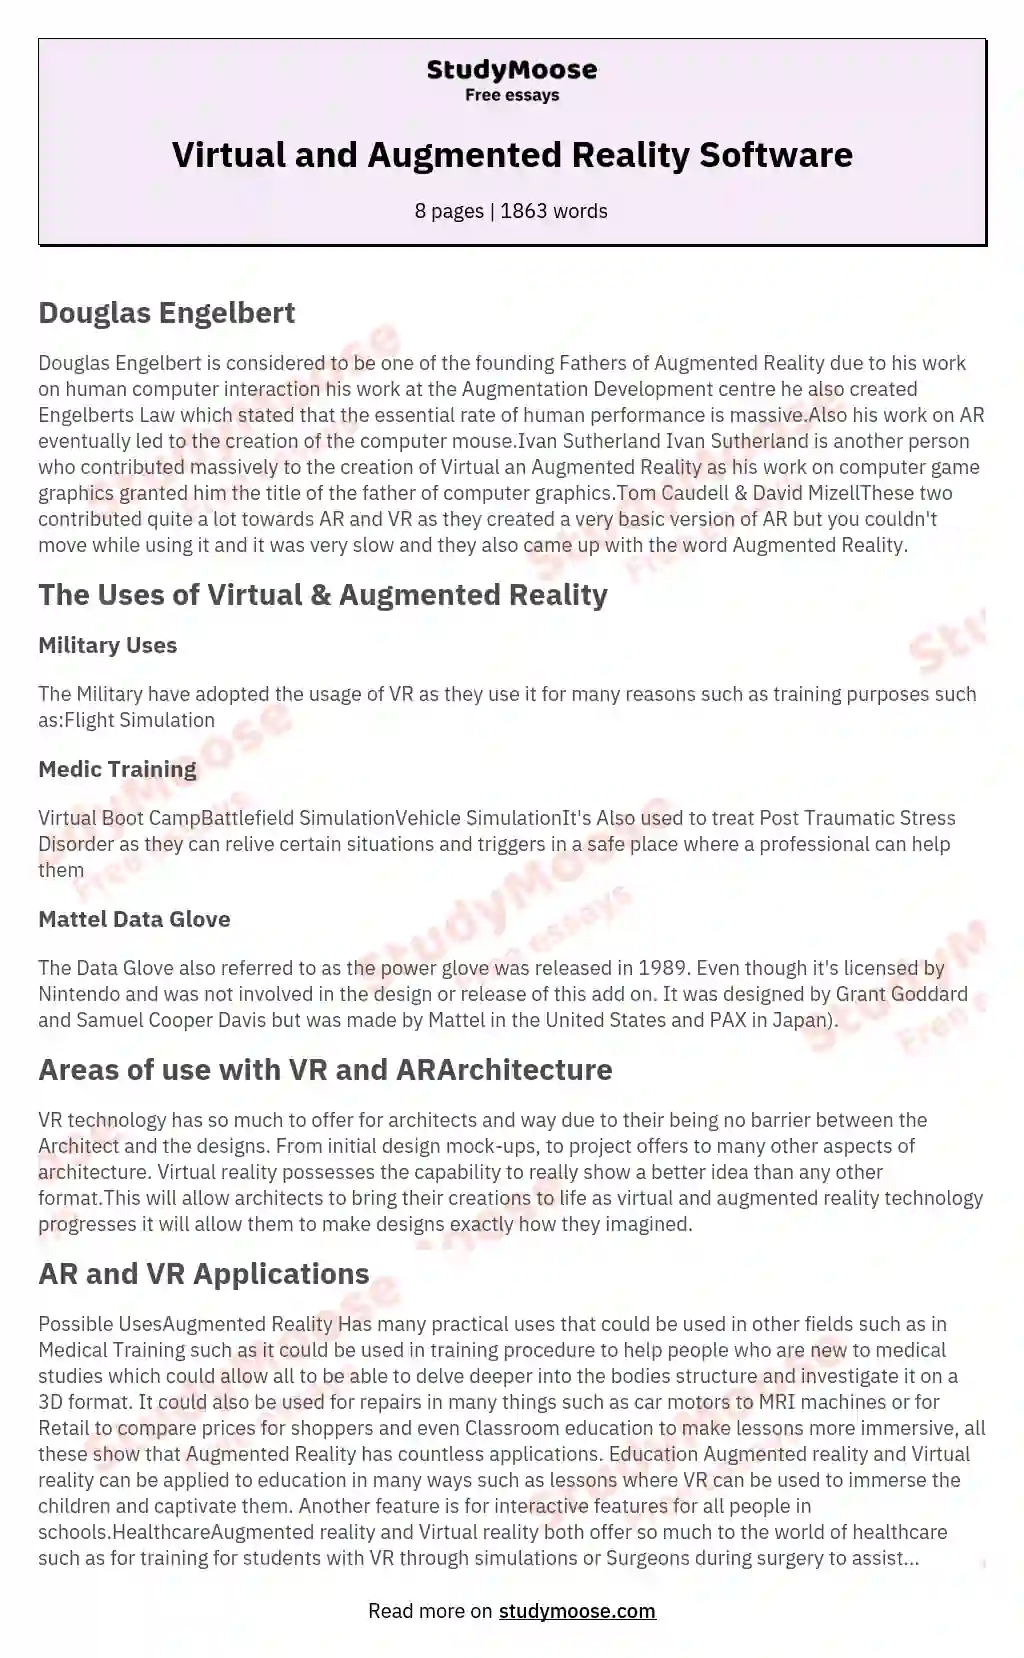 Virtual and Augmented Reality Software essay